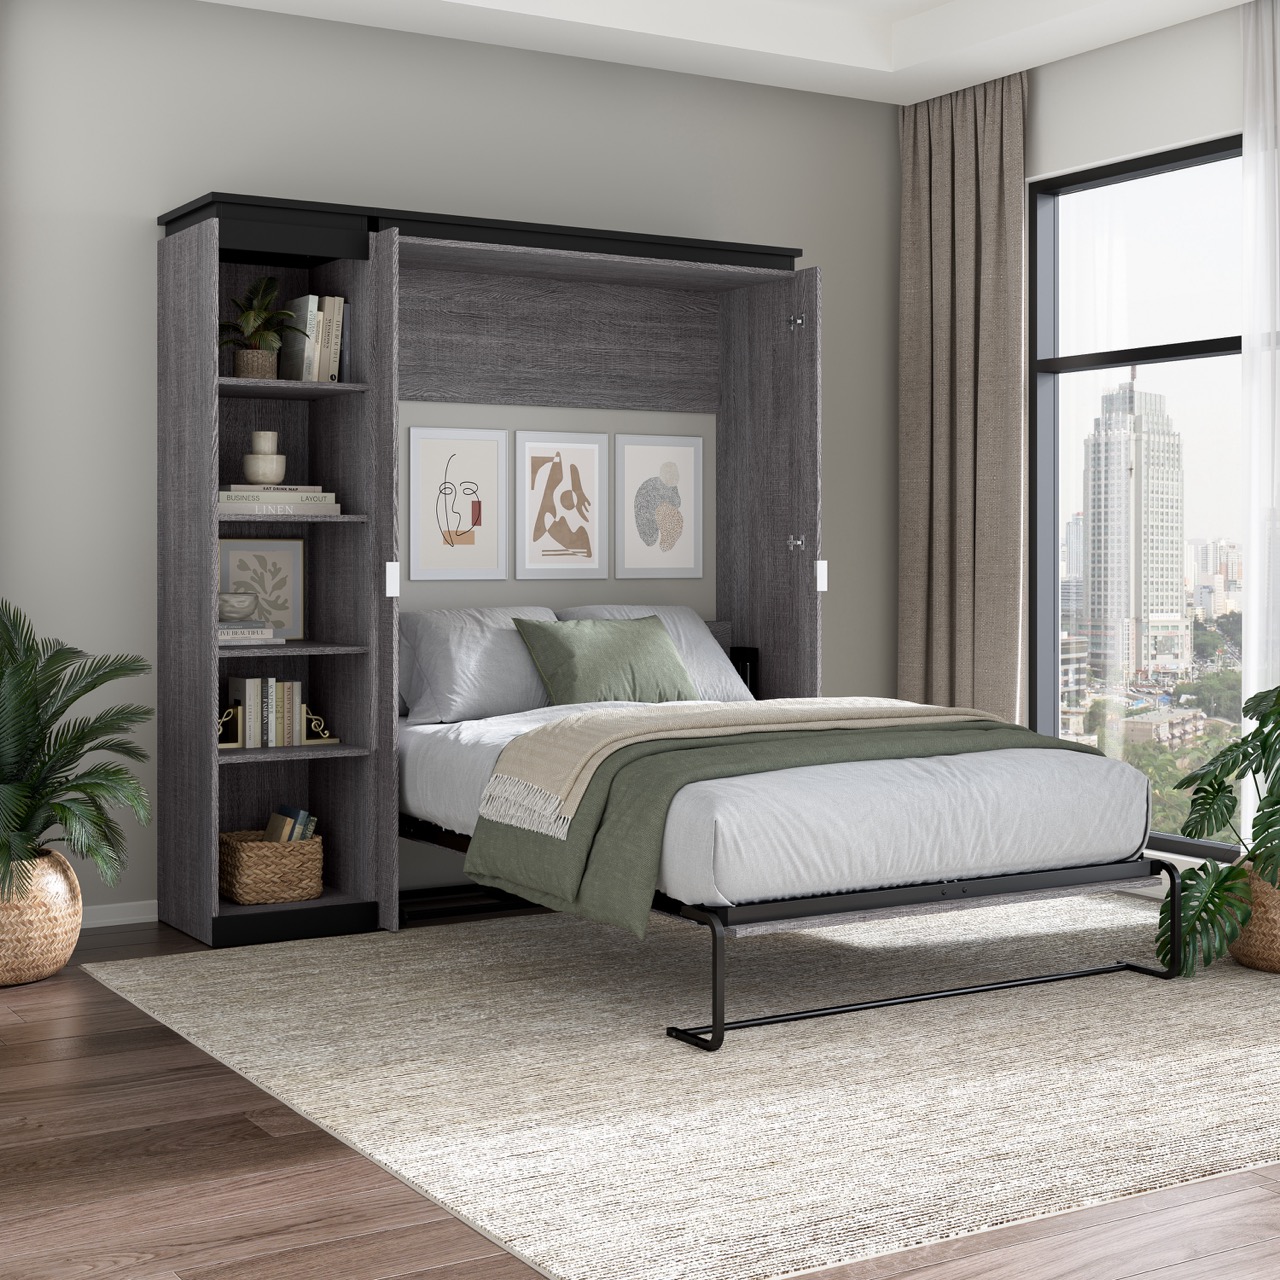 The Ultimate Solution for Small Bedrooms: A Murphy Bed